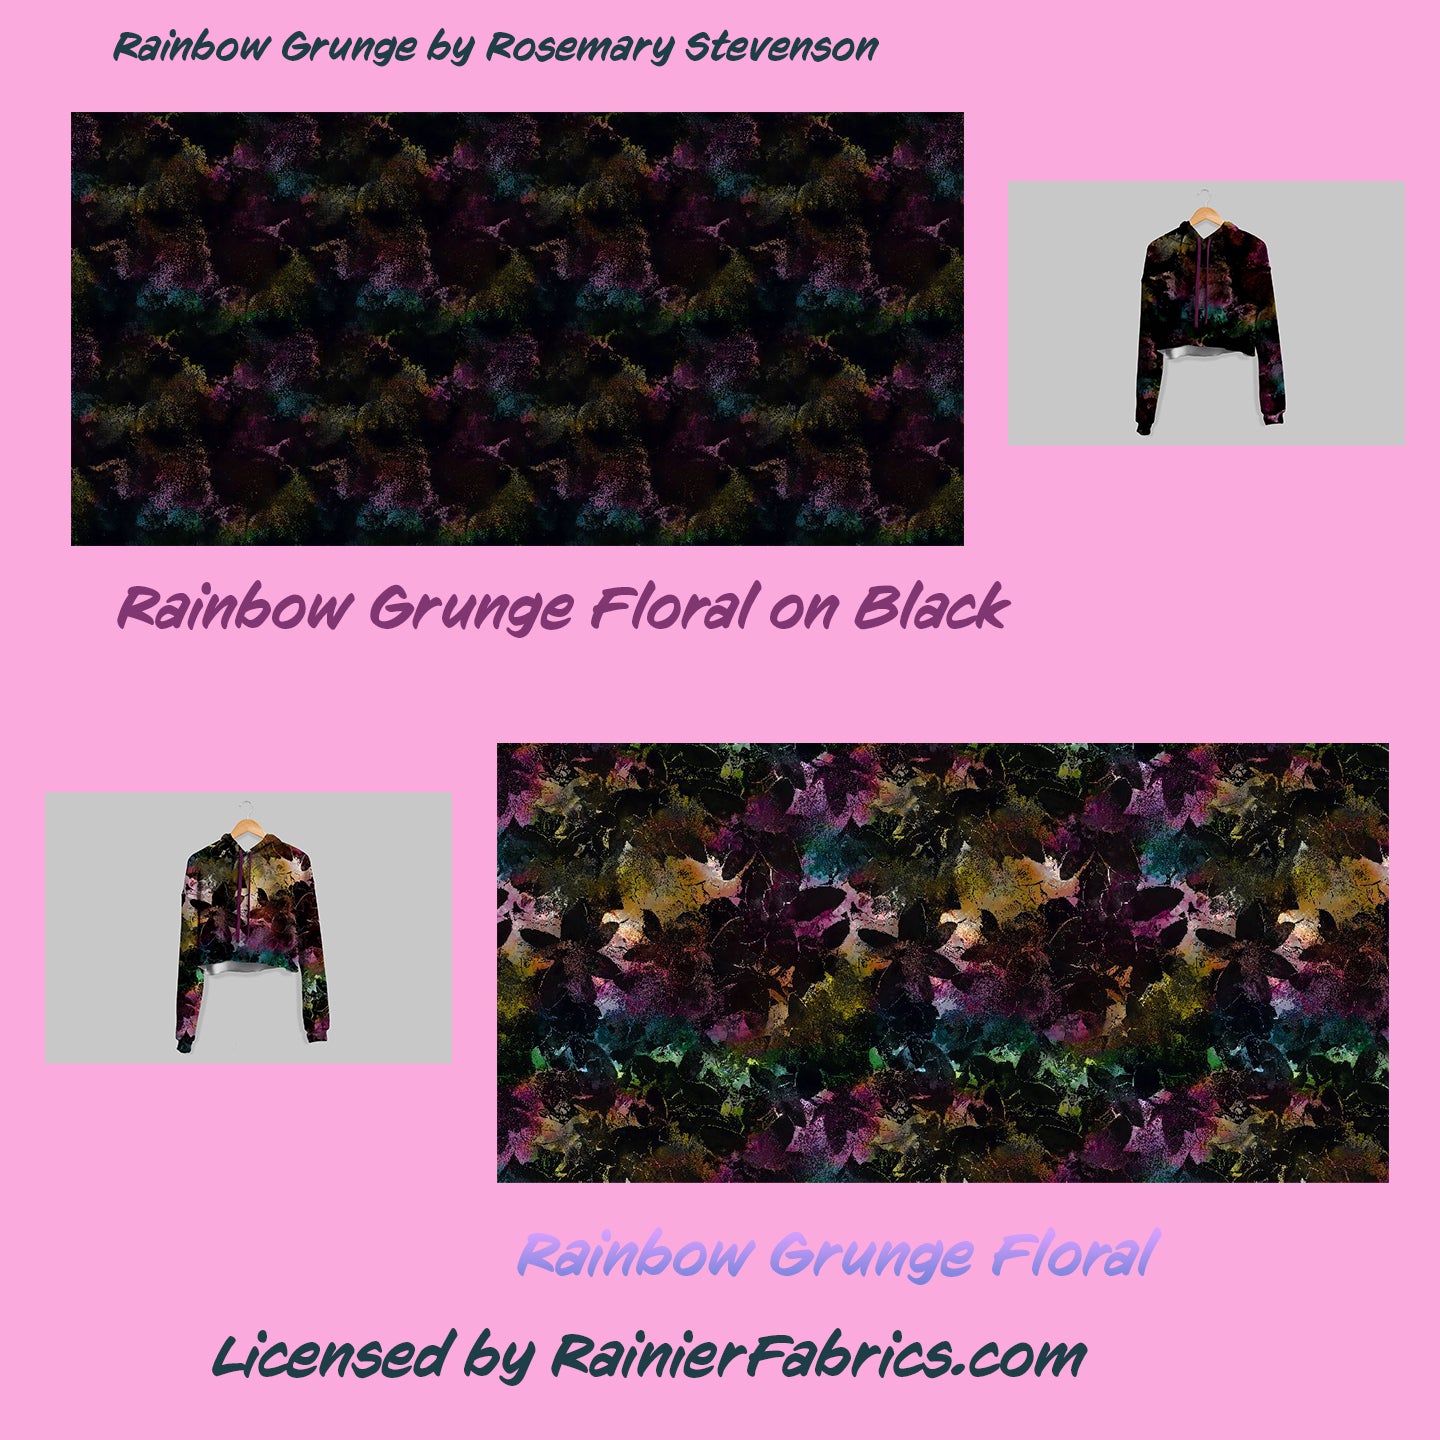 Rainbow Grunge from Rosemary Stevenson  - 2-5 day turnaround - Order by 1/2 yard; Description of bases below